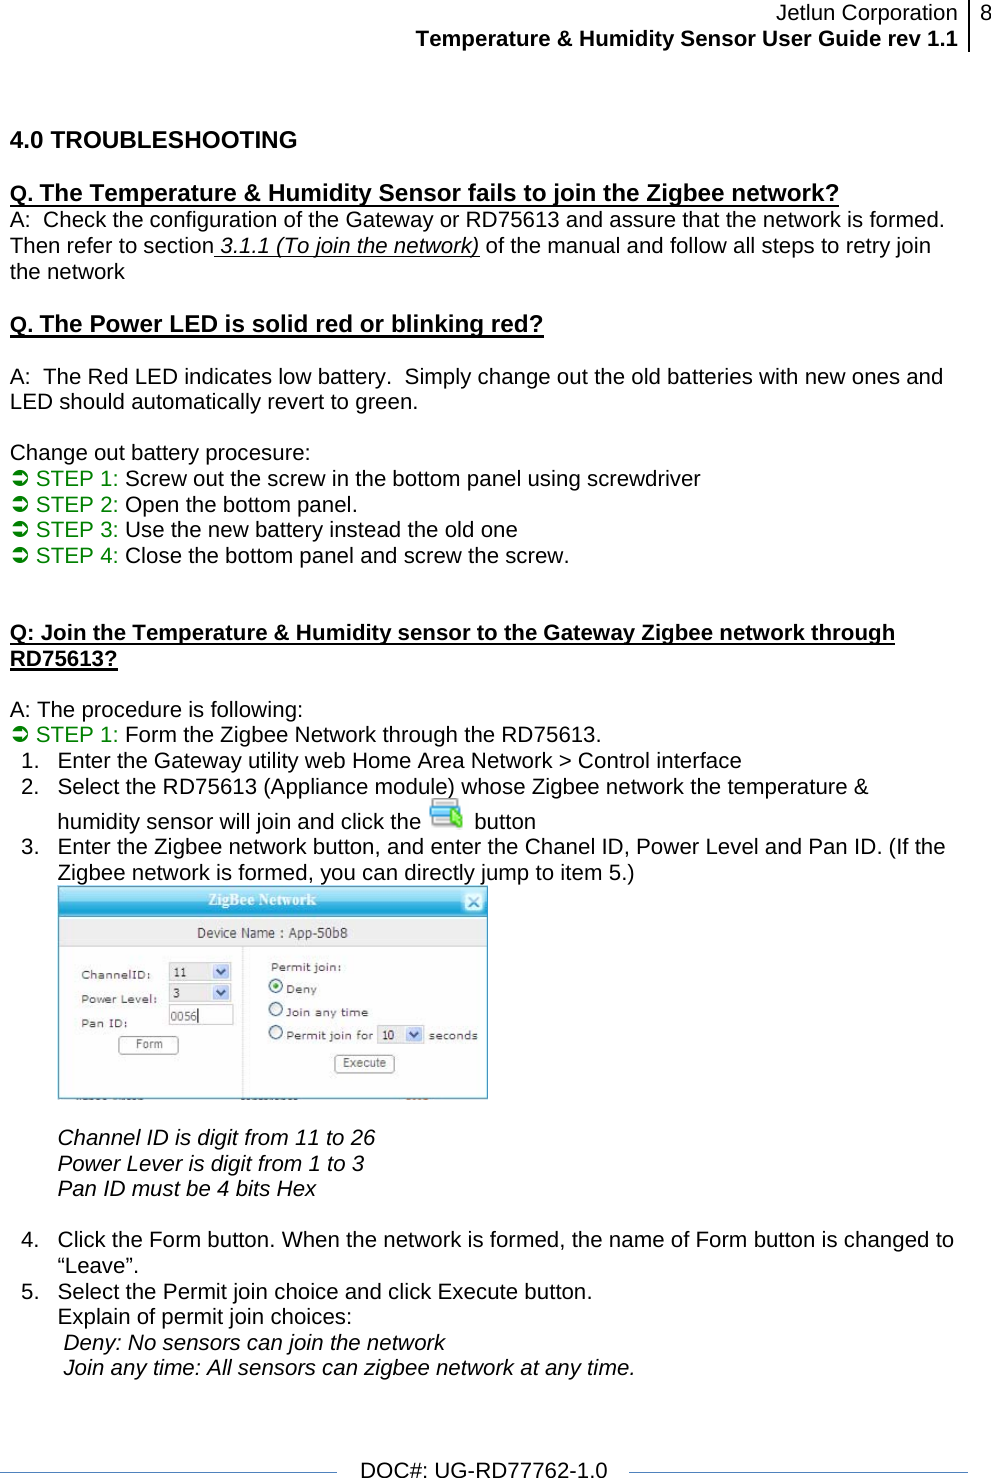 Jetlun CorporationTemperature &amp; Humidity Sensor User Guide rev 1.1 8   DOC#: UG-RD77762-1.0  4.0 TROUBLESHOOTING  Q. The Temperature &amp; Humidity Sensor fails to join the Zigbee network? A:  Check the configuration of the Gateway or RD75613 and assure that the network is formed. Then refer to section 3.1.1 (To join the network) of the manual and follow all steps to retry join the network  Q. The Power LED is solid red or blinking red?  A:  The Red LED indicates low battery.  Simply change out the old batteries with new ones and LED should automatically revert to green.   Change out battery procesure:  Â STEP 1: Screw out the screw in the bottom panel using screwdriver Â STEP 2: Open the bottom panel. Â STEP 3: Use the new battery instead the old one Â STEP 4: Close the bottom panel and screw the screw.   Q: Join the Temperature &amp; Humidity sensor to the Gateway Zigbee network through RD75613?  A: The procedure is following: Â STEP 1: Form the Zigbee Network through the RD75613.  1.  Enter the Gateway utility web Home Area Network &gt; Control interface 2.  Select the RD75613 (Appliance module) whose Zigbee network the temperature &amp; humidity sensor will join and click the   button 3.  Enter the Zigbee network button, and enter the Chanel ID, Power Level and Pan ID. (If the Zigbee network is formed, you can directly jump to item 5.)   Channel ID is digit from 11 to 26 Power Lever is digit from 1 to 3 Pan ID must be 4 bits Hex  4.  Click the Form button. When the network is formed, the name of Form button is changed to “Leave”. 5.  Select the Permit join choice and click Execute button. Explain of permit join choices:  Deny: No sensors can join the network  Join any time: All sensors can zigbee network at any time. 